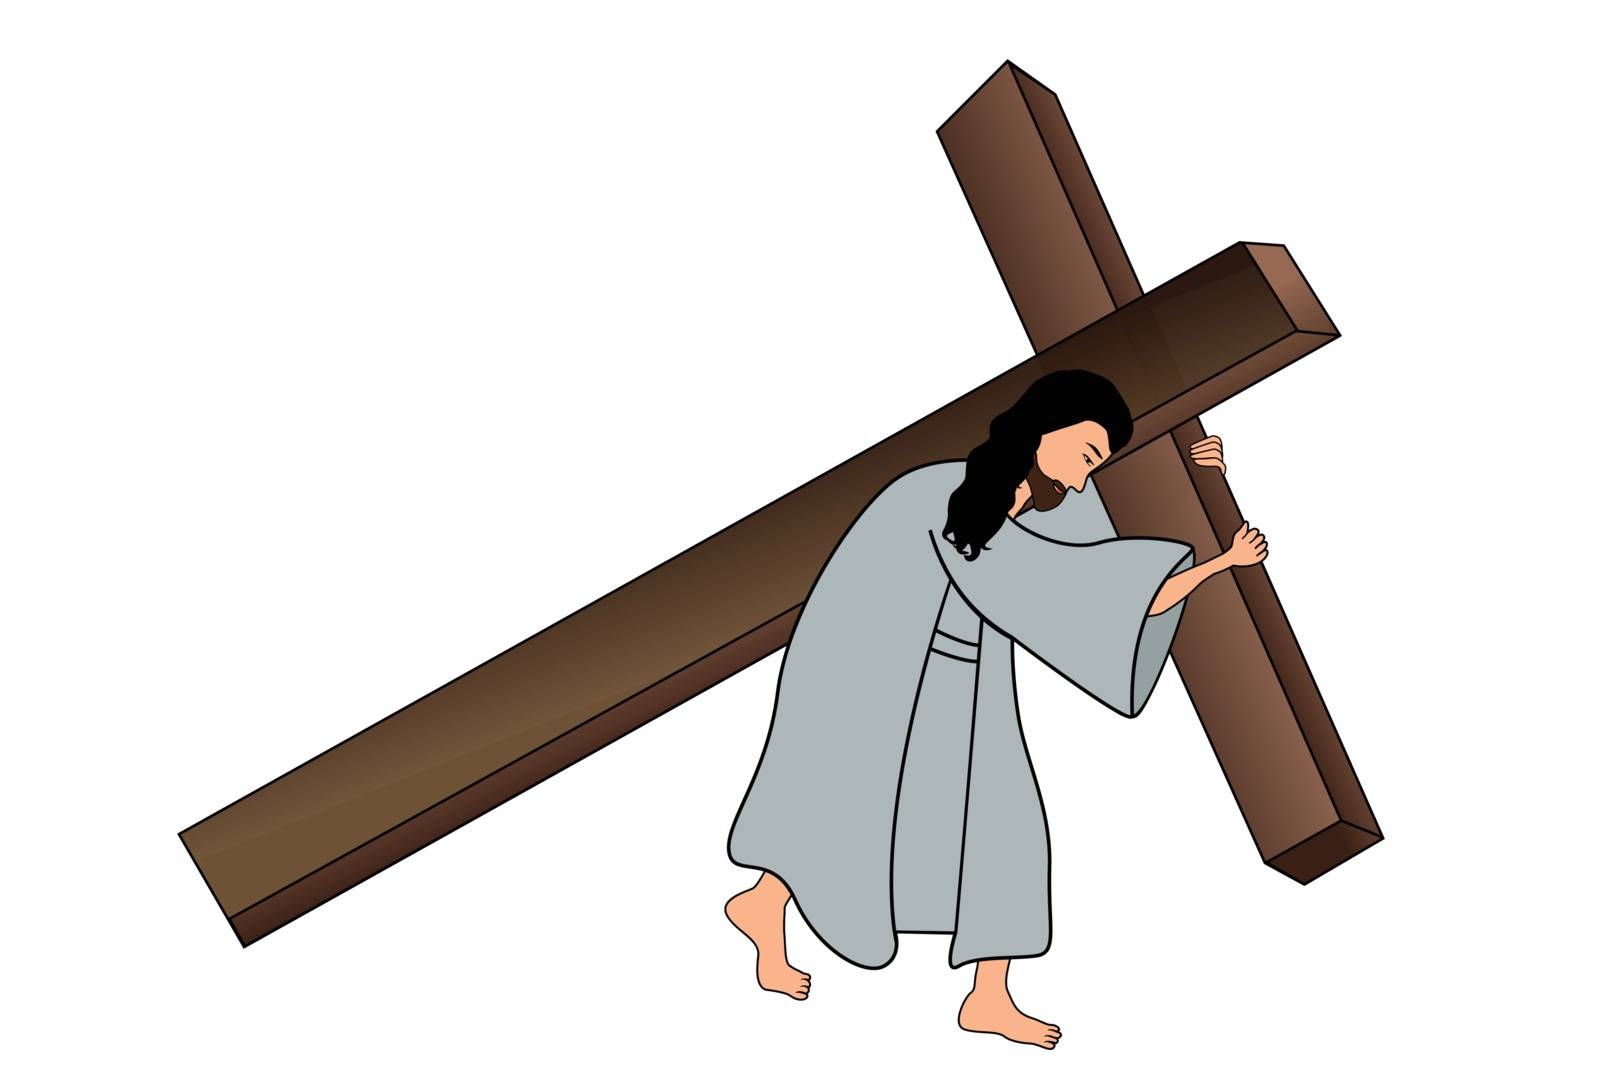 Jesus carrying the cross by grace21